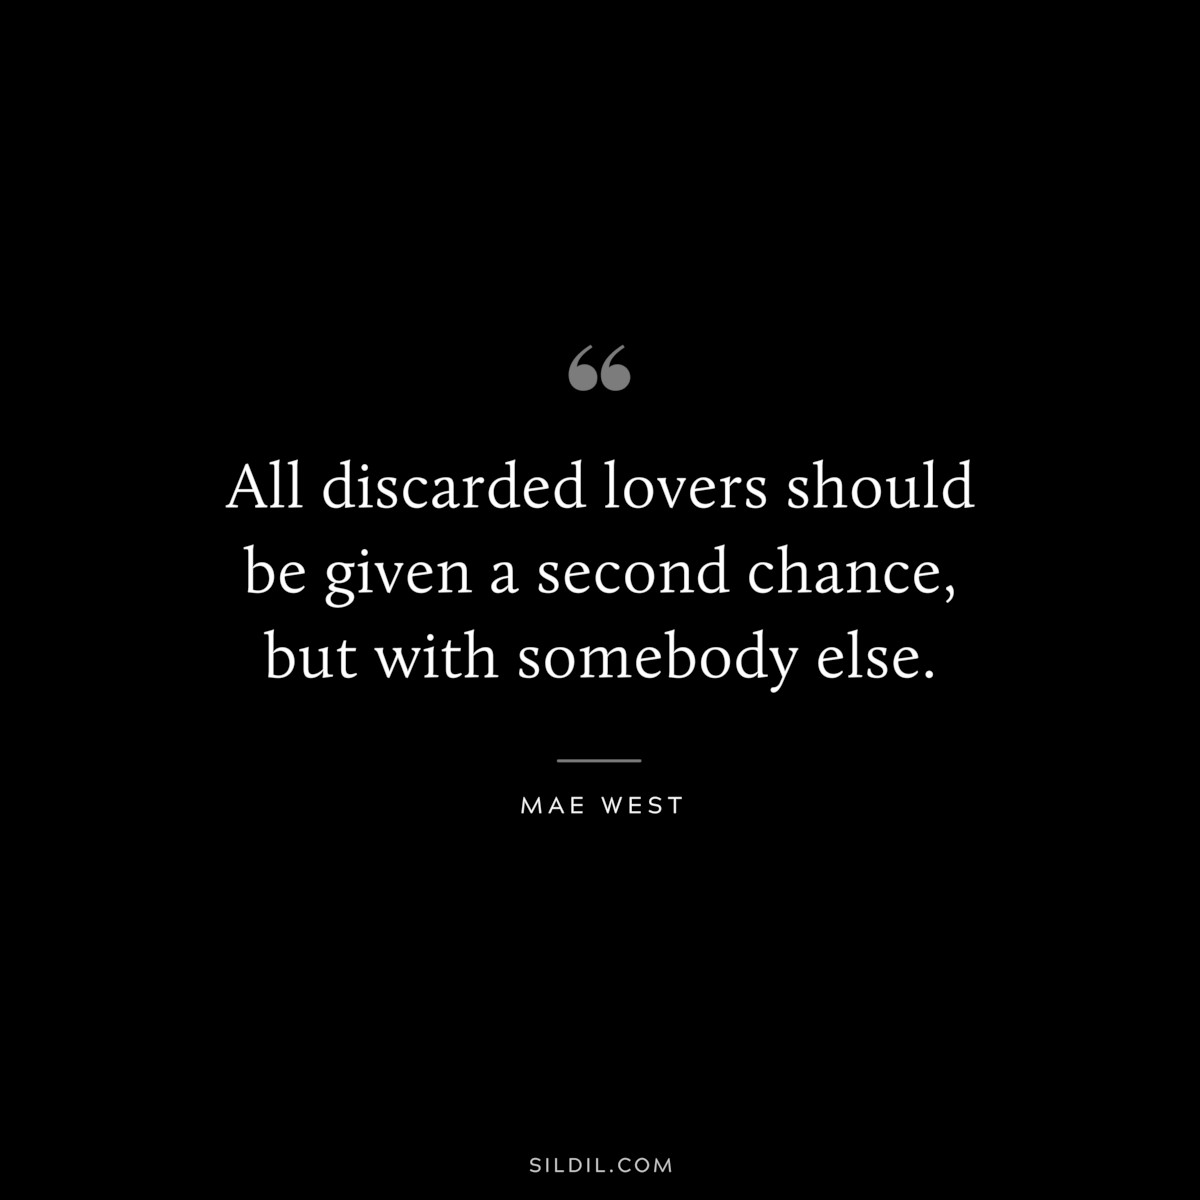 All discarded lovers should be given a second chance, but with somebody else. ― Mae West